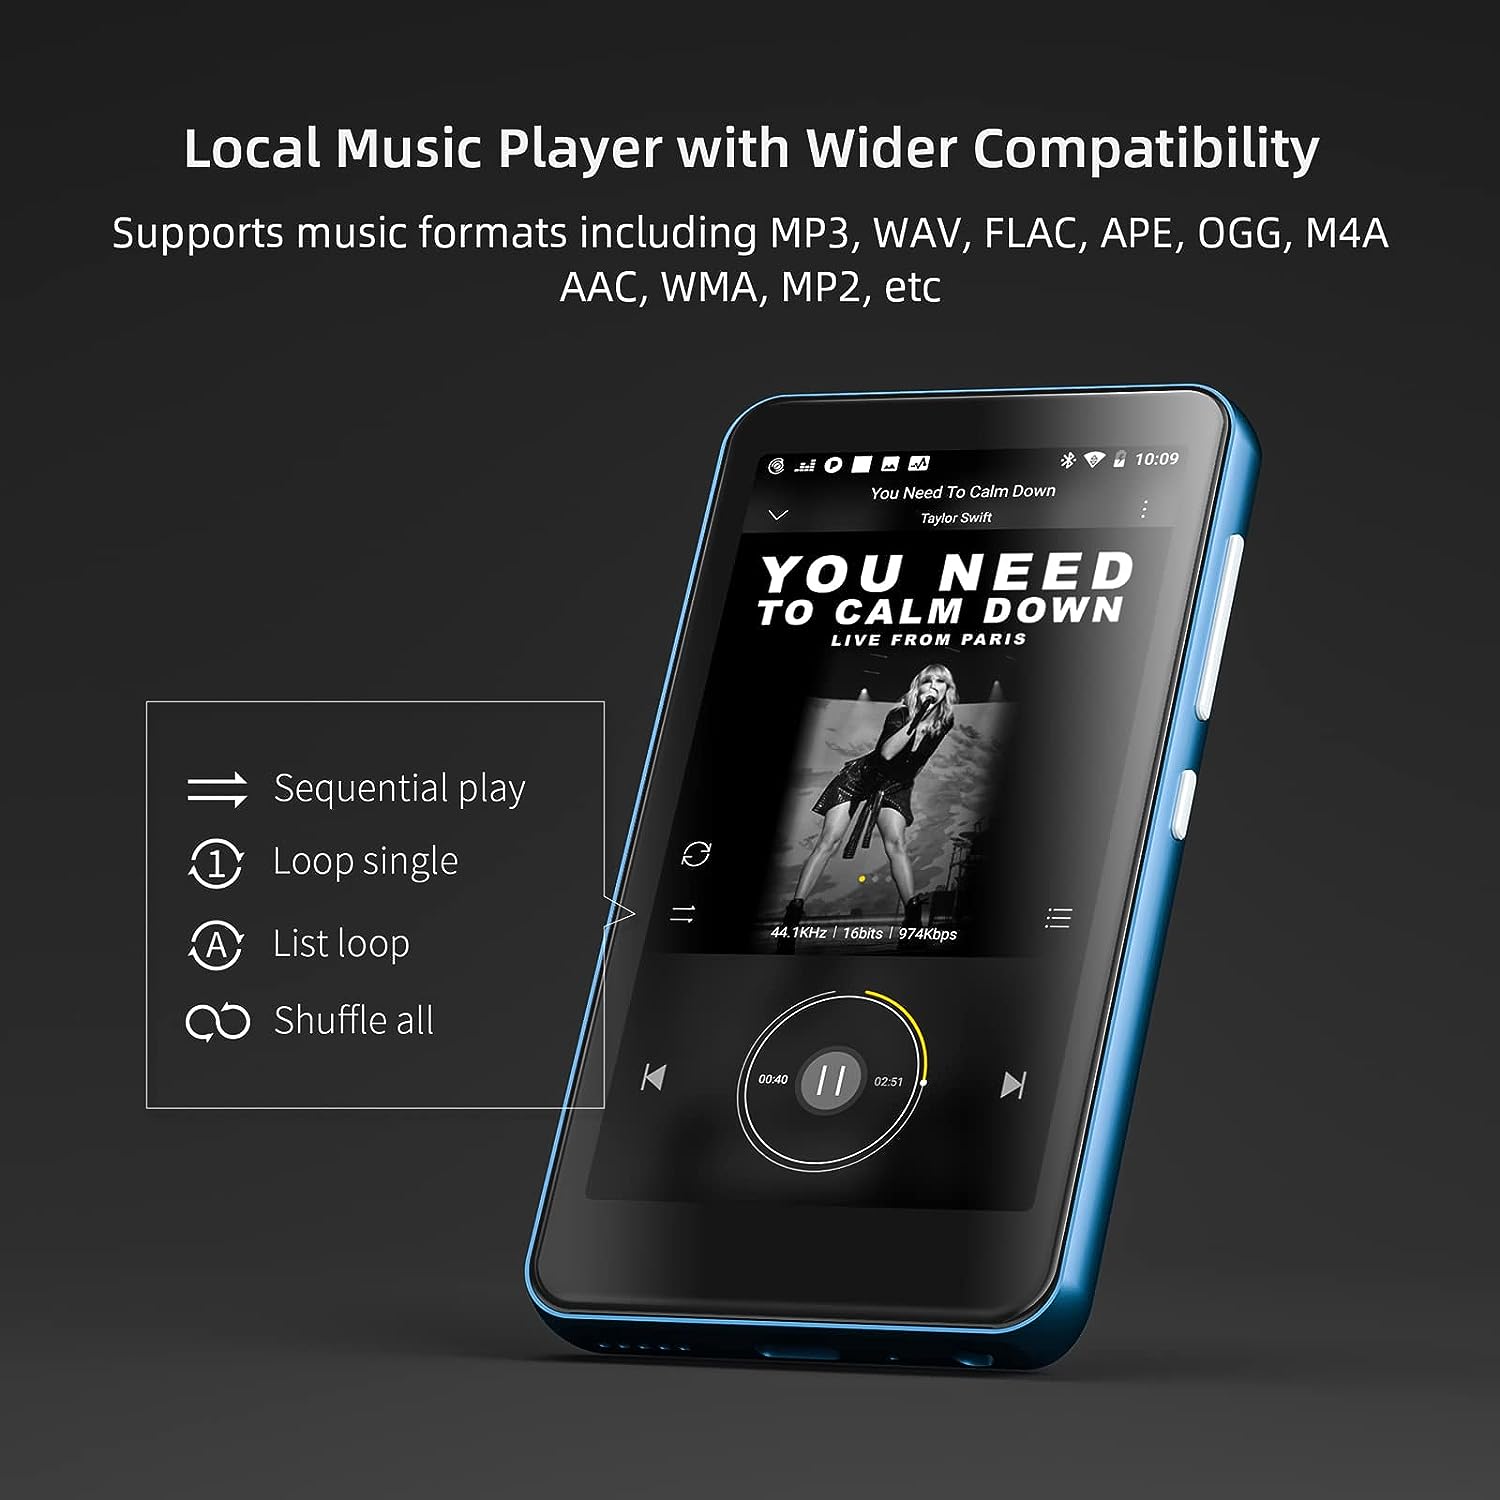 80GB MP3 Player with Bluetooth and WiFi, MP4 MP3 Player with Spotify 4" Full Touch Screen, Android Music Player with Pandora, HiFi Sound Walkman Digital Audio Player with Speaker